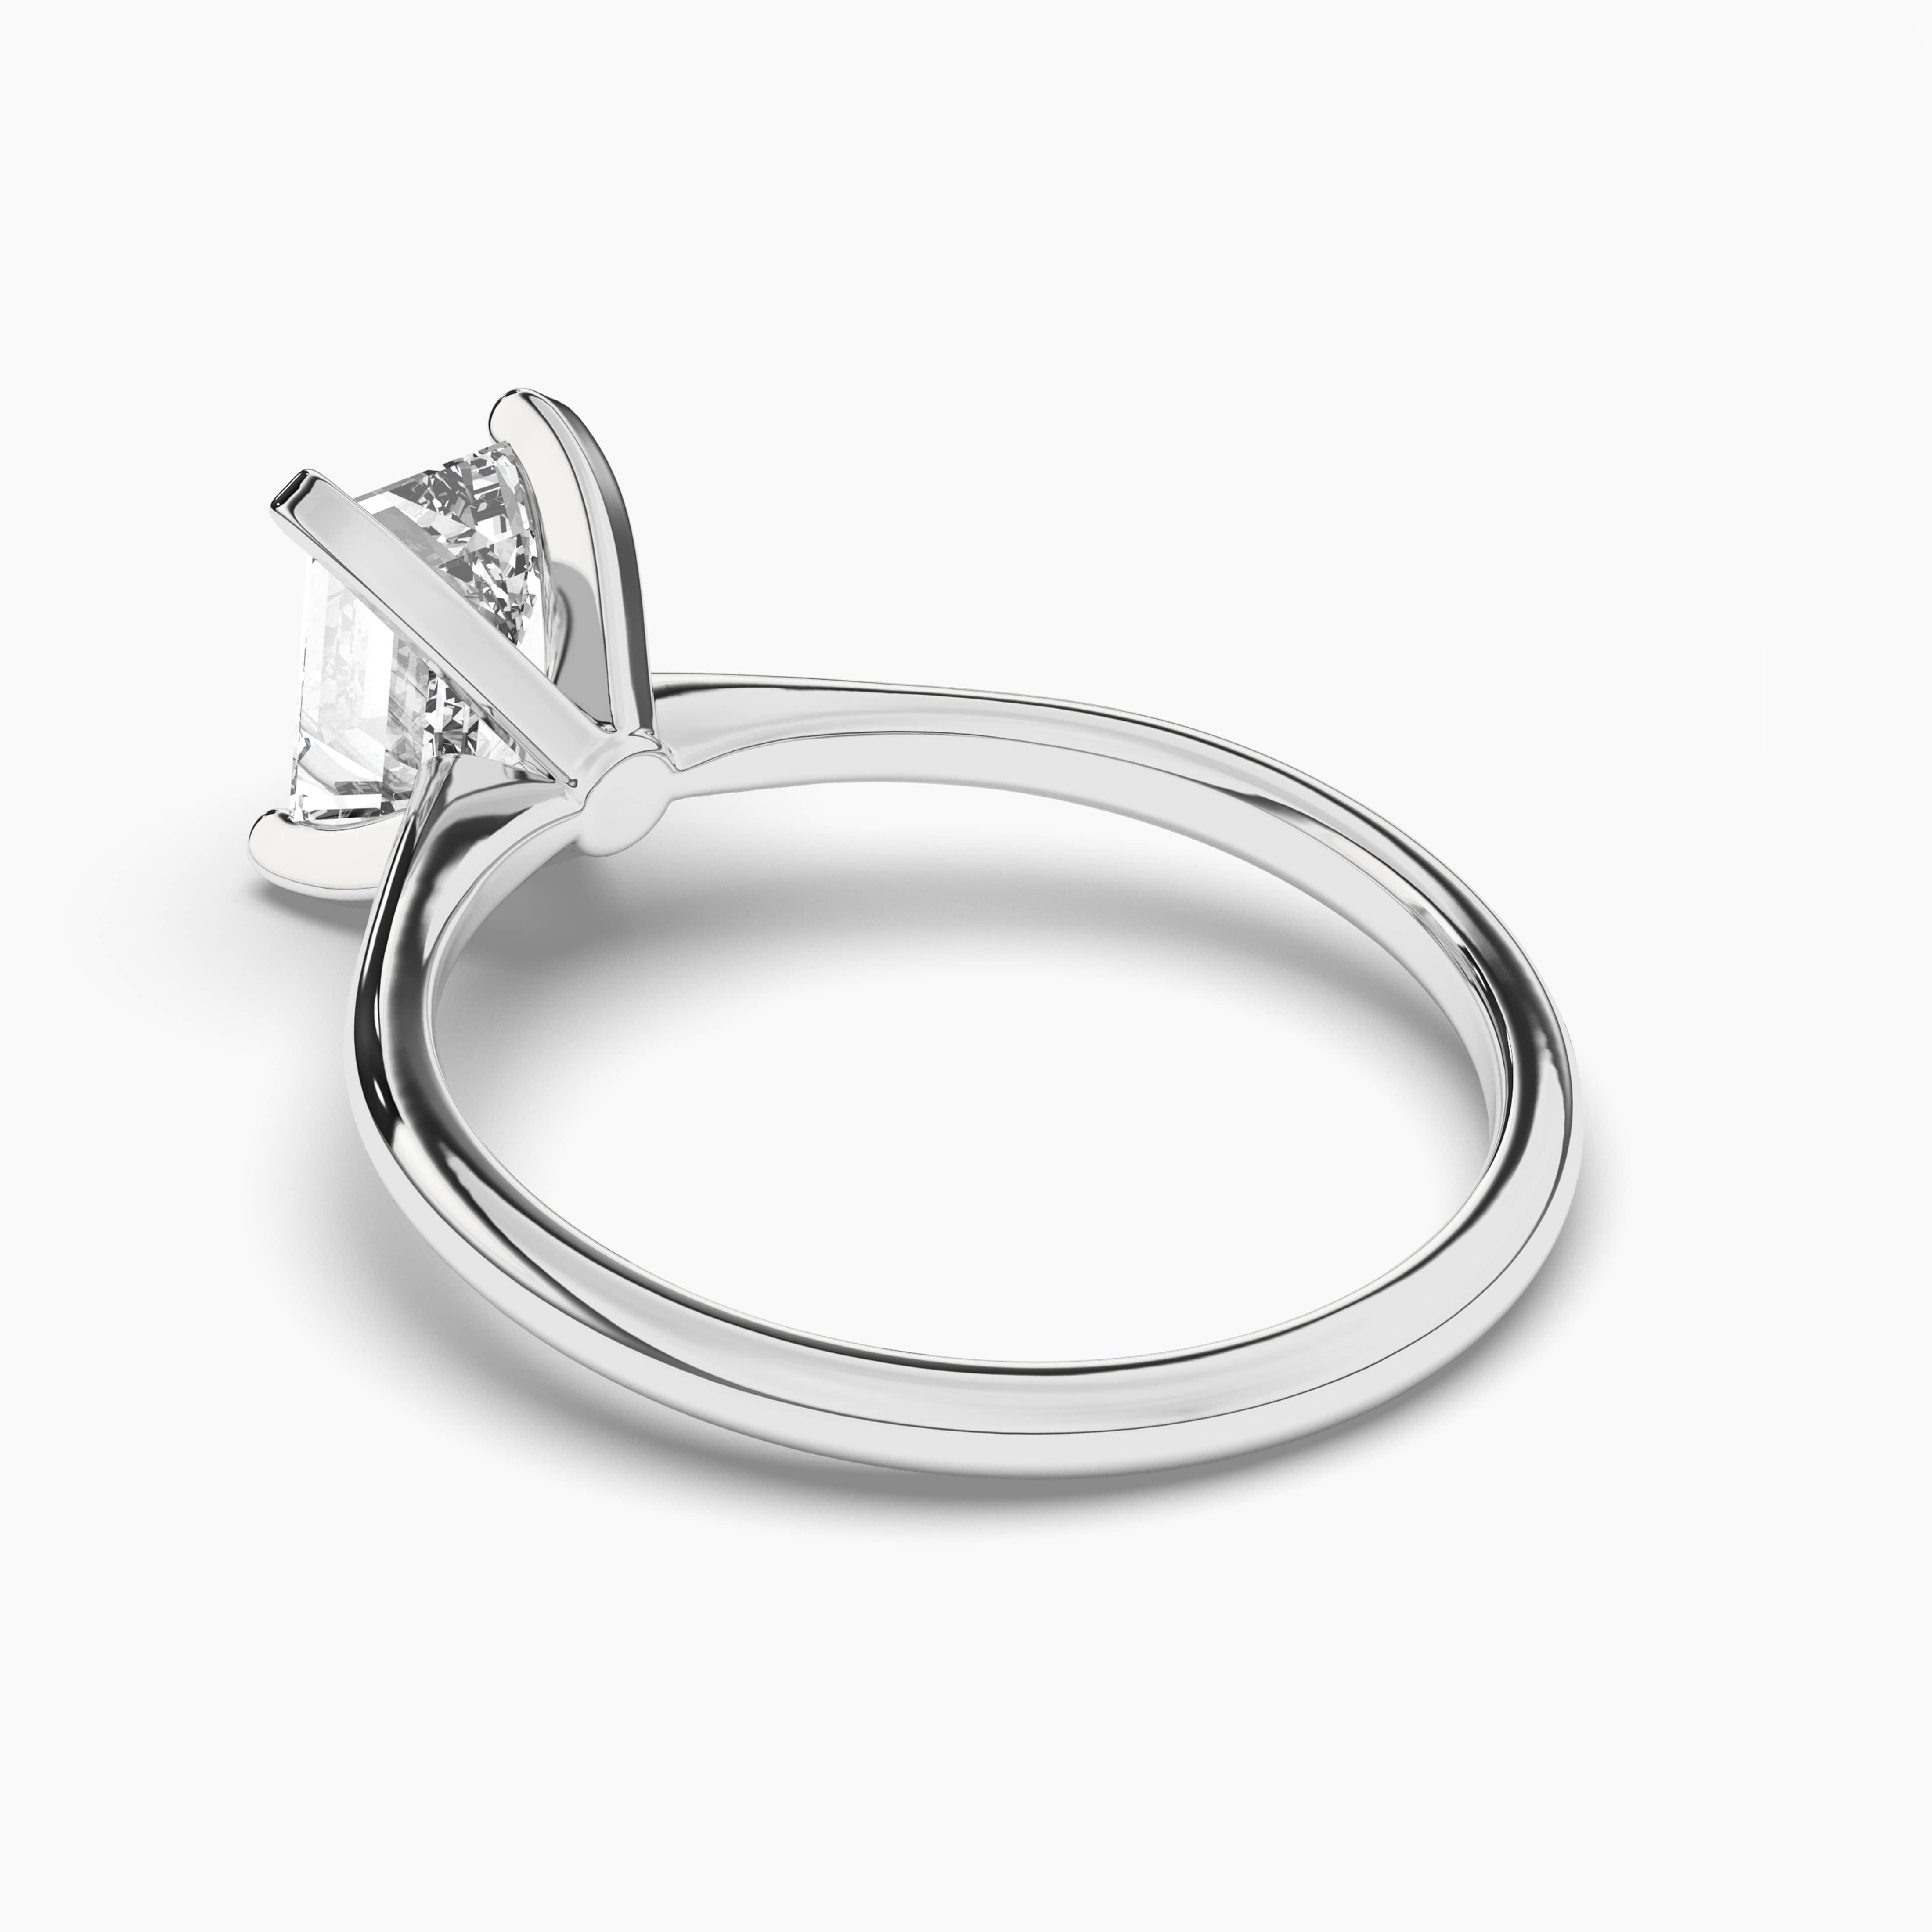 Emerald Cut Solitaire Engagement Ring In White Gold